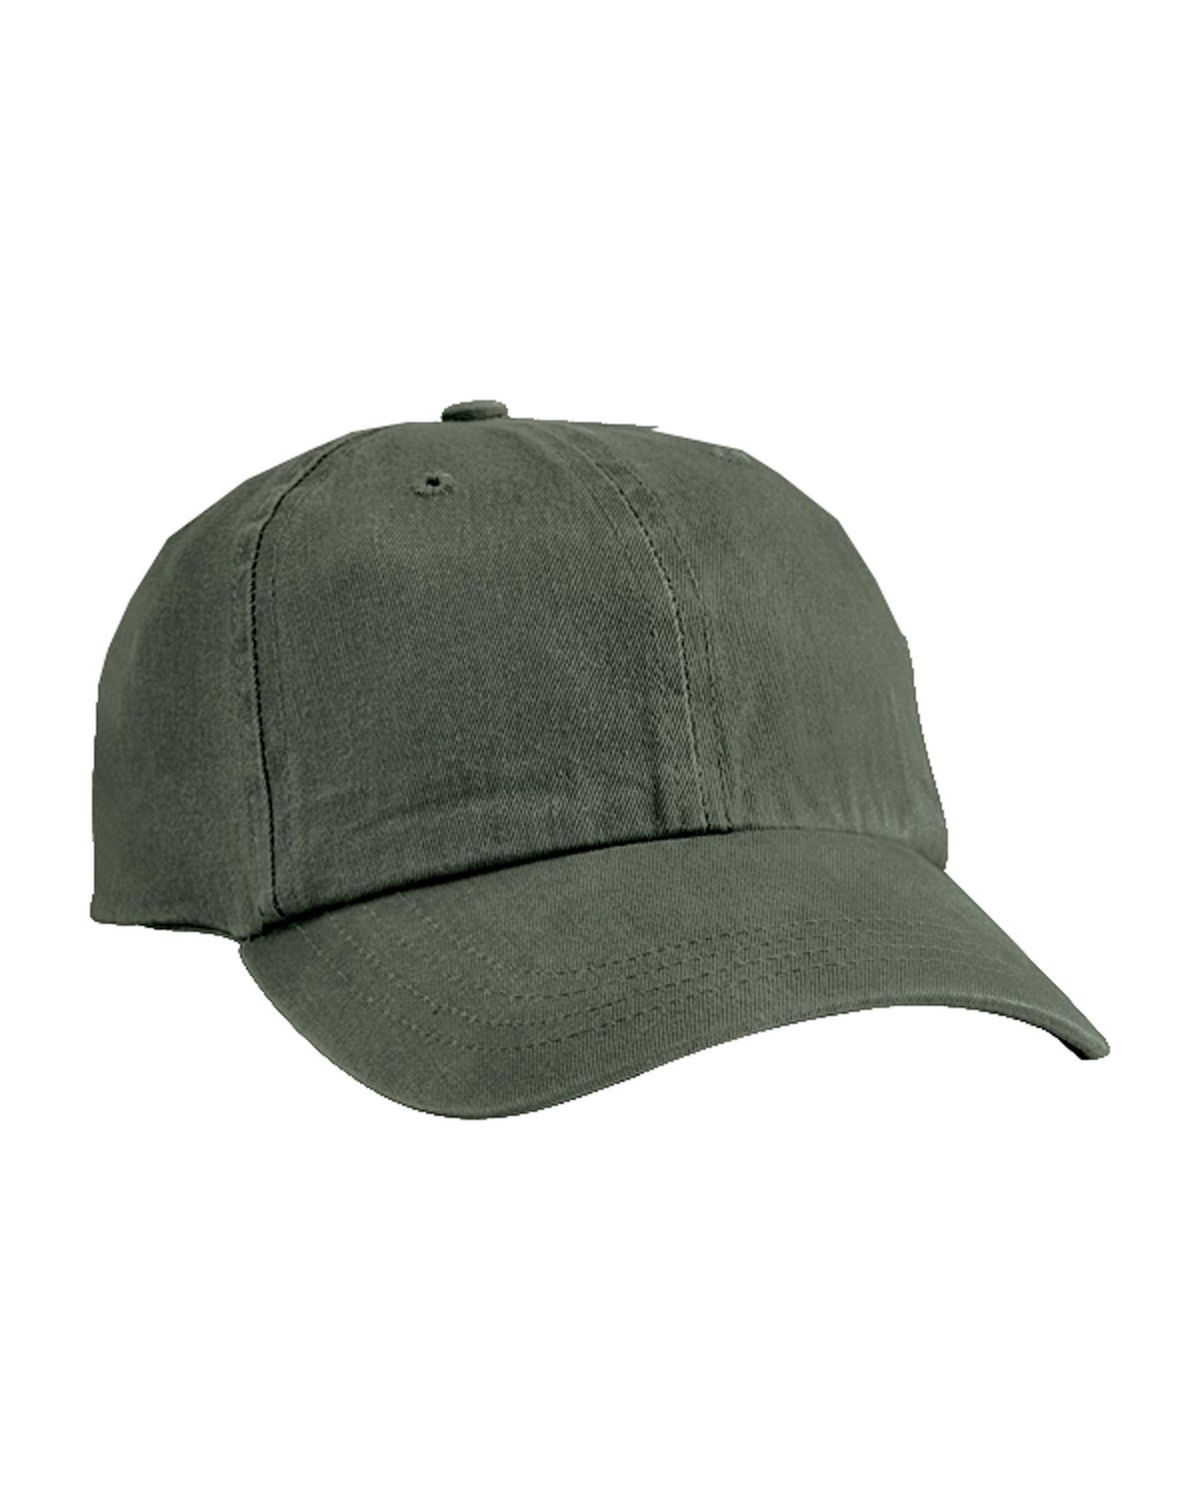 'Port & Company CP84 Pigment-Dyed Cap'